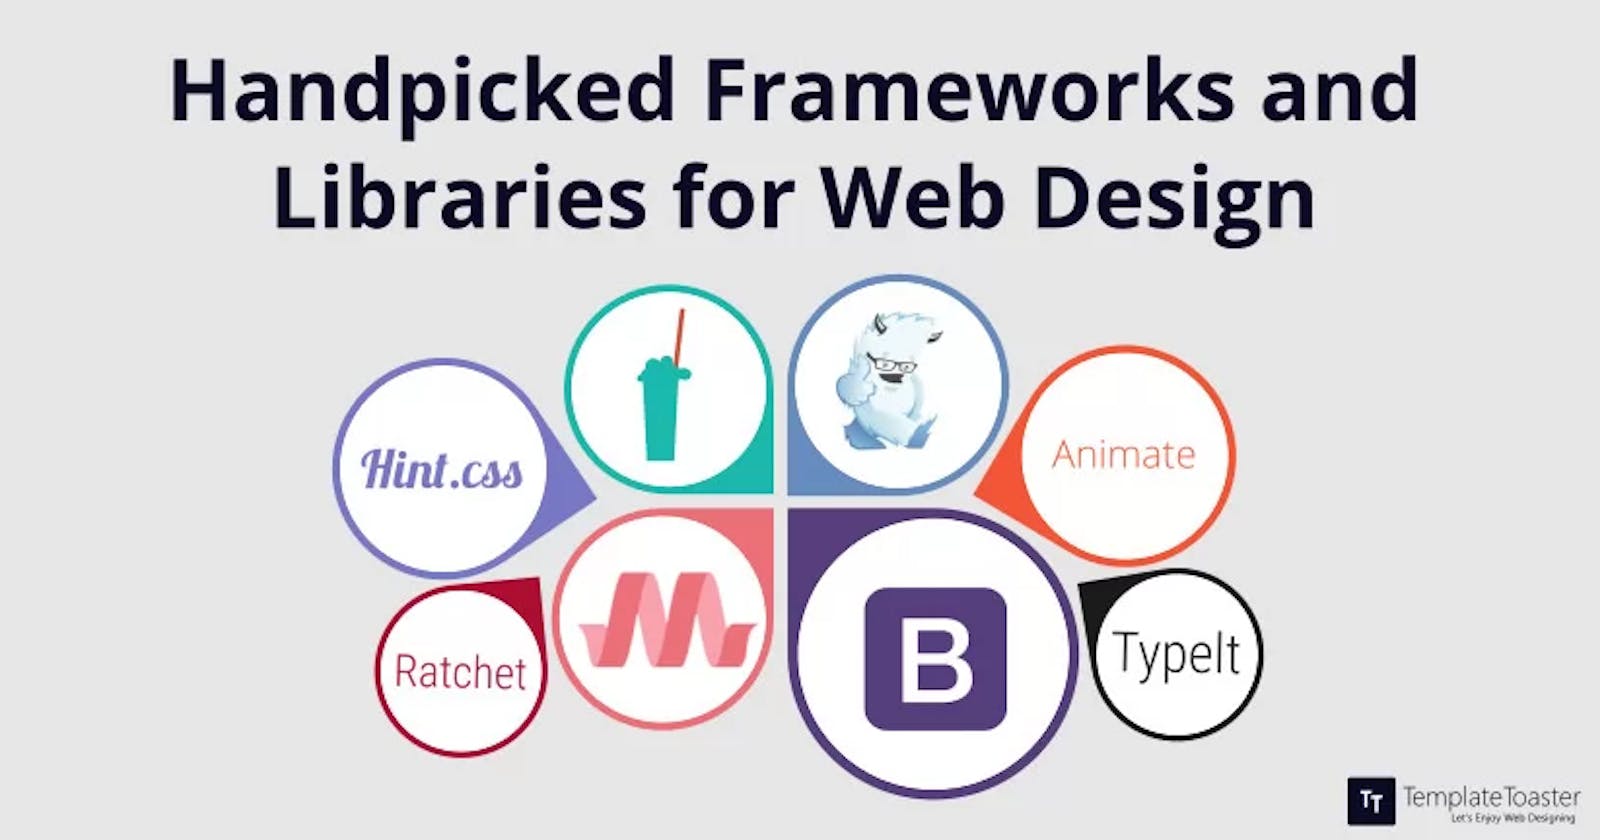 Relevance of libraries in web development